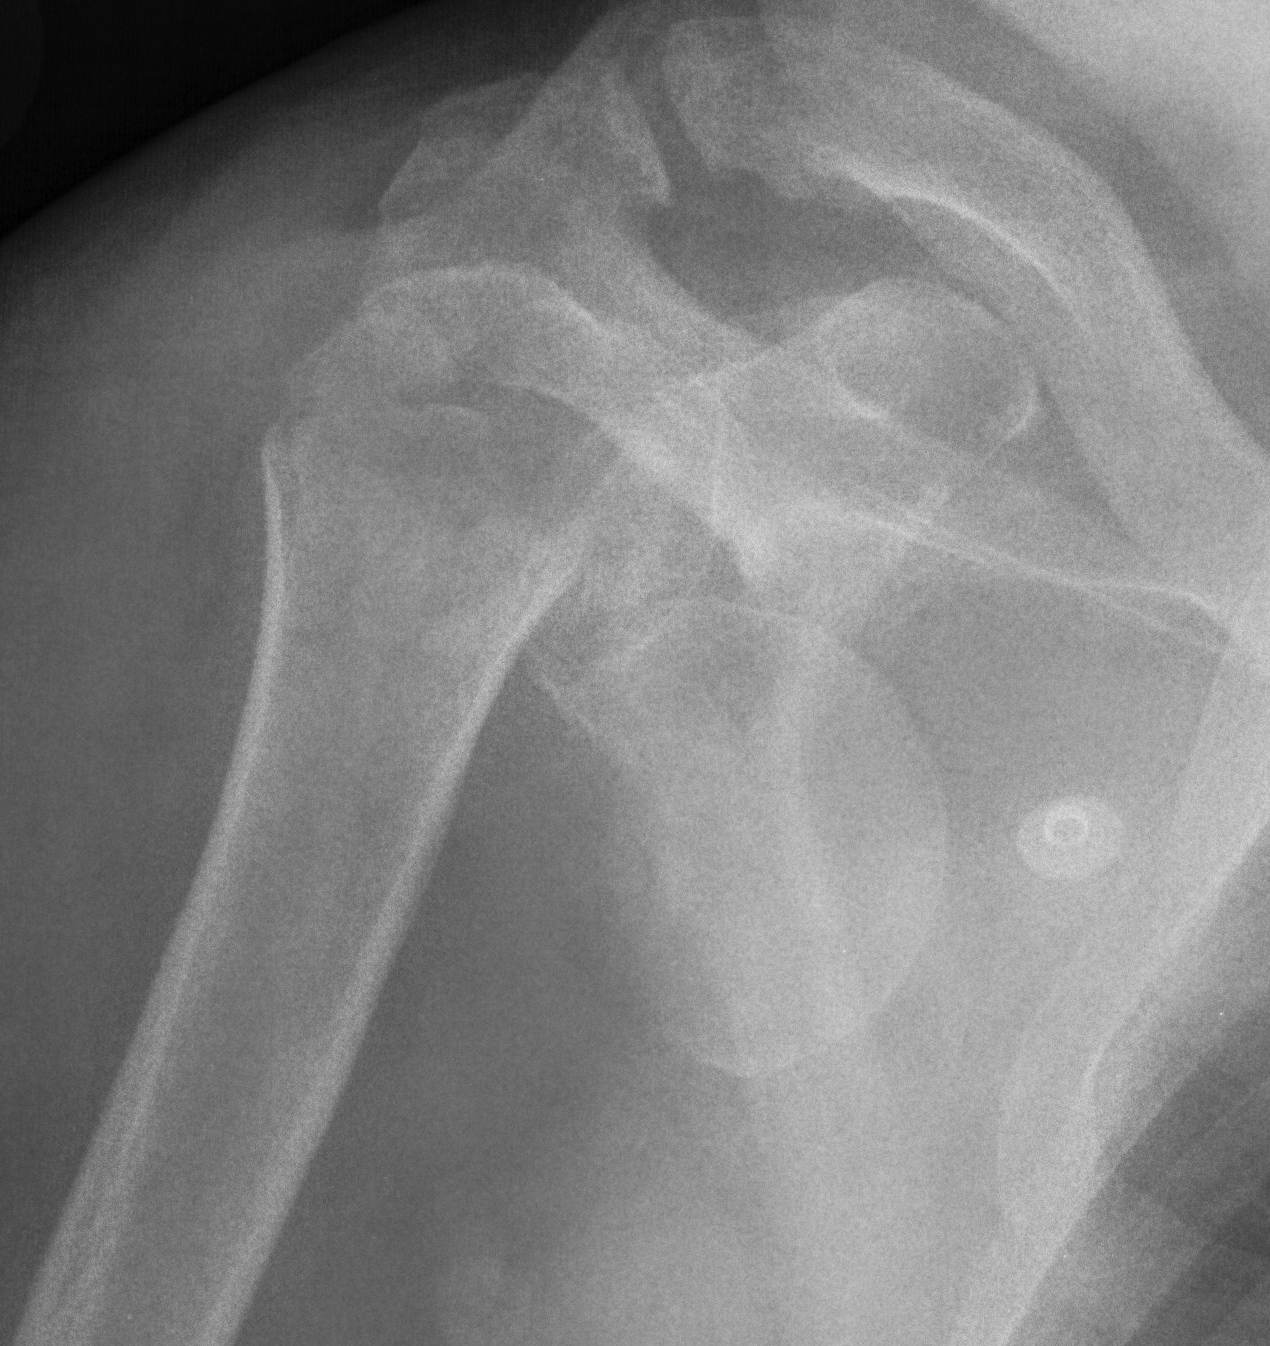 Proximal Humerus Fracture Dislocation